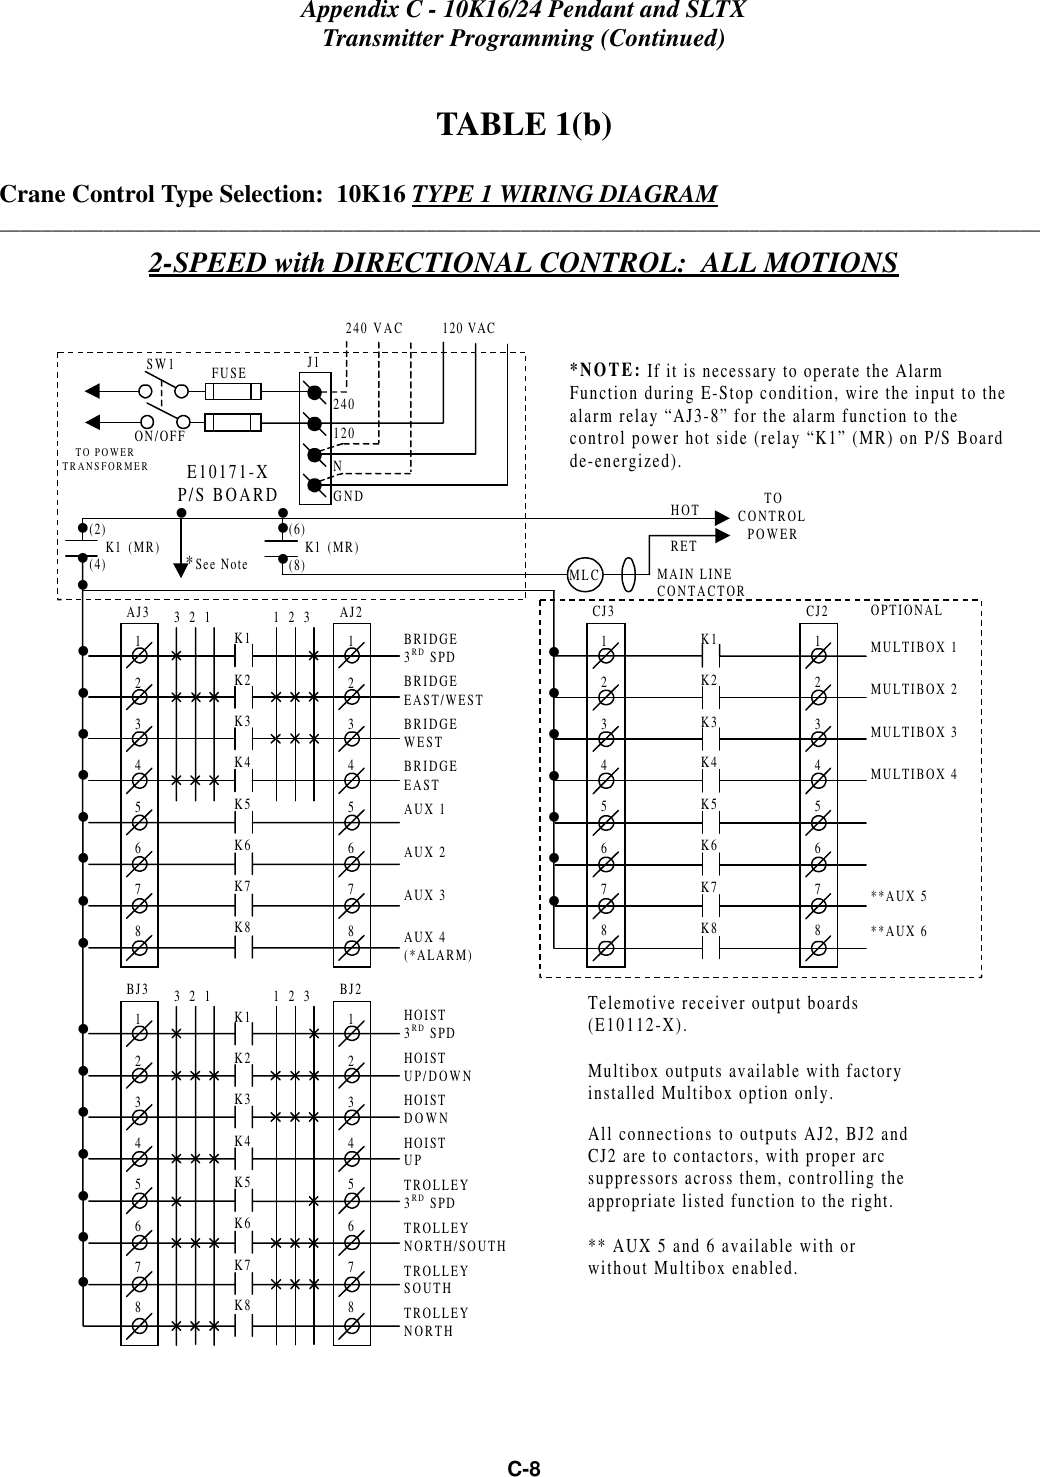 Appendix C - 10K16/24 Pendant and SLTXTransmitter Programming (Continued)C-8TABLE 1(b)Crane Control Type Selection:  10K16 TYPE 1 WIRING DIAGRAM____________________________________________________________________________________________________2-SPEED with DIRECTIONAL CONTROL:  ALL MOTIONS CJ312345678CJ212345678K1K2K3K4K5K6K7K8OPTIONALMULTIBOX 1MULTIBOX 2MULTIBOX 3MULTIBOX 4**AUX 5**AUX 6•••••••BJ312345678BJ212345678K1K2K3K4K5K6K7K83  2  1 1  2  3HOIST3RD SPDHOISTUP/DOWNHOISTDOWNHOISTUPTROLLEY3RD SPDTROLLEYNORTH/SOUTHTROLLEYSOUTHTROLLEYNORTH••••••AJ312345678AJ212345678K1K2K3K4K5K6K7K83  2  1 1  2  3BRIDGE3RD SPDBRIDGEEAST/WESTBRIDGEWESTBRIDGEEASTAUX 1AUX 2AUX 3AUX 4(*ALARM)••••••••*NOTE: If it is necessary to operate the AlarmFunction during E-Stop condition, wire the input to thealarm relay “AJ3-8” for the alarm function to thecontrol power hot side (relay “K1” (MR) on P/S Boardde-energized).Telemotive receiver output boards(E10112-X).Multibox outputs available with factoryinstalled Multibox option only.All connections to outputs AJ2, BJ2 andCJ2 are to contactors, with proper arcsuppressors across them, controlling theappropriate listed function to the right.** AUX 5 and 6 available with orwithout Multibox enabled.240 VAC          120 VACSW1ON/OFFTO POWERTRANSFORMERE10171-XP/S BOARDMAIN LINECONTACTORTOCONTROLPOWERMLCHOTRET(2)    K1 (MR)(4)•••*See Note•240120FUSE J1NGND(6)    K1 (MR)(8)••••